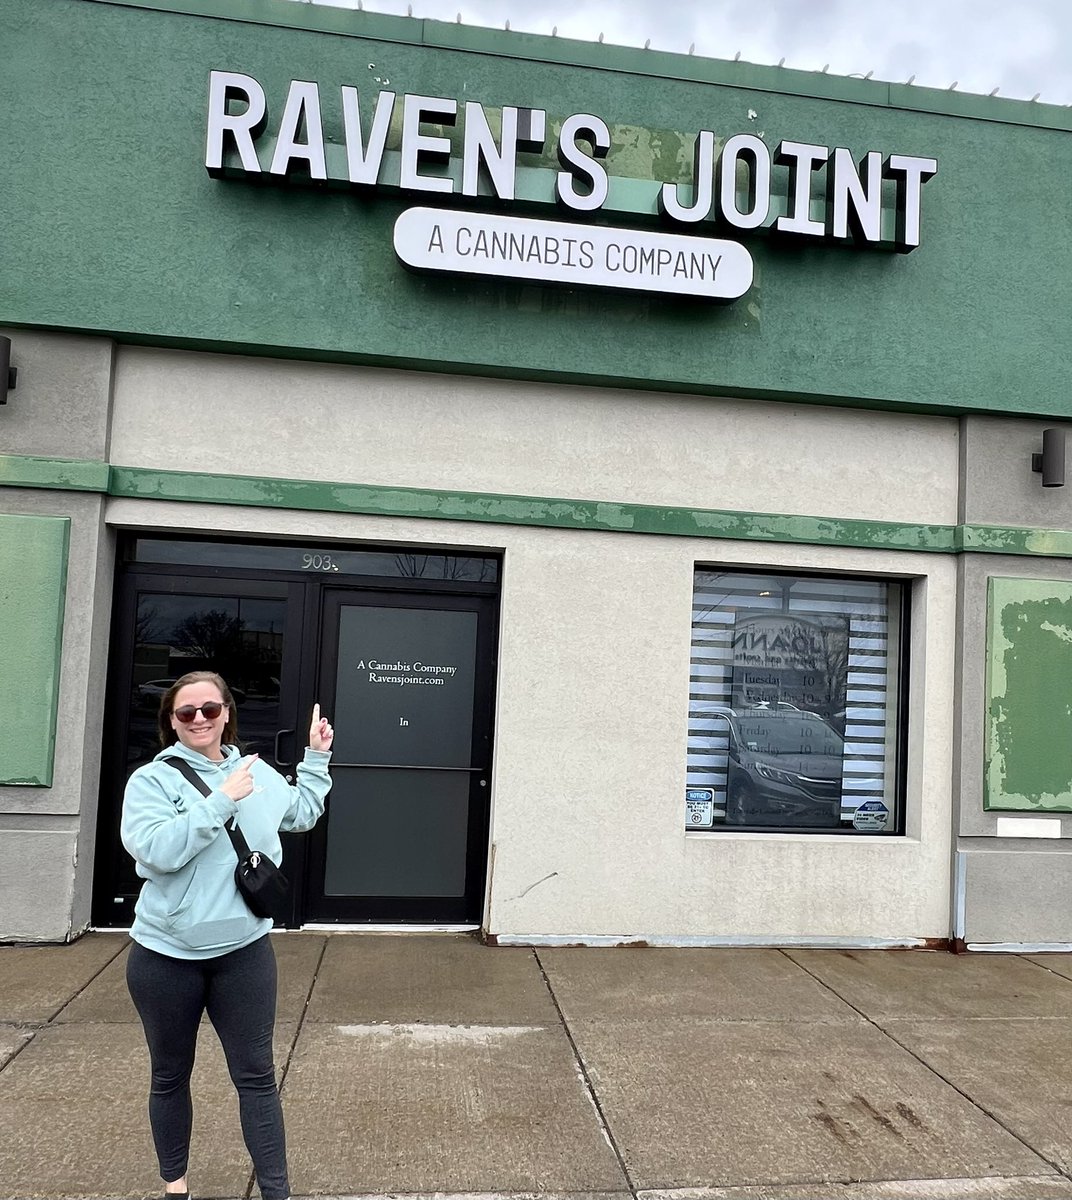 Made a stop today @ravensjoint Got some good 💨, got to see @Bin_Hamin and didn’t mark out.. Today was a good day 😎